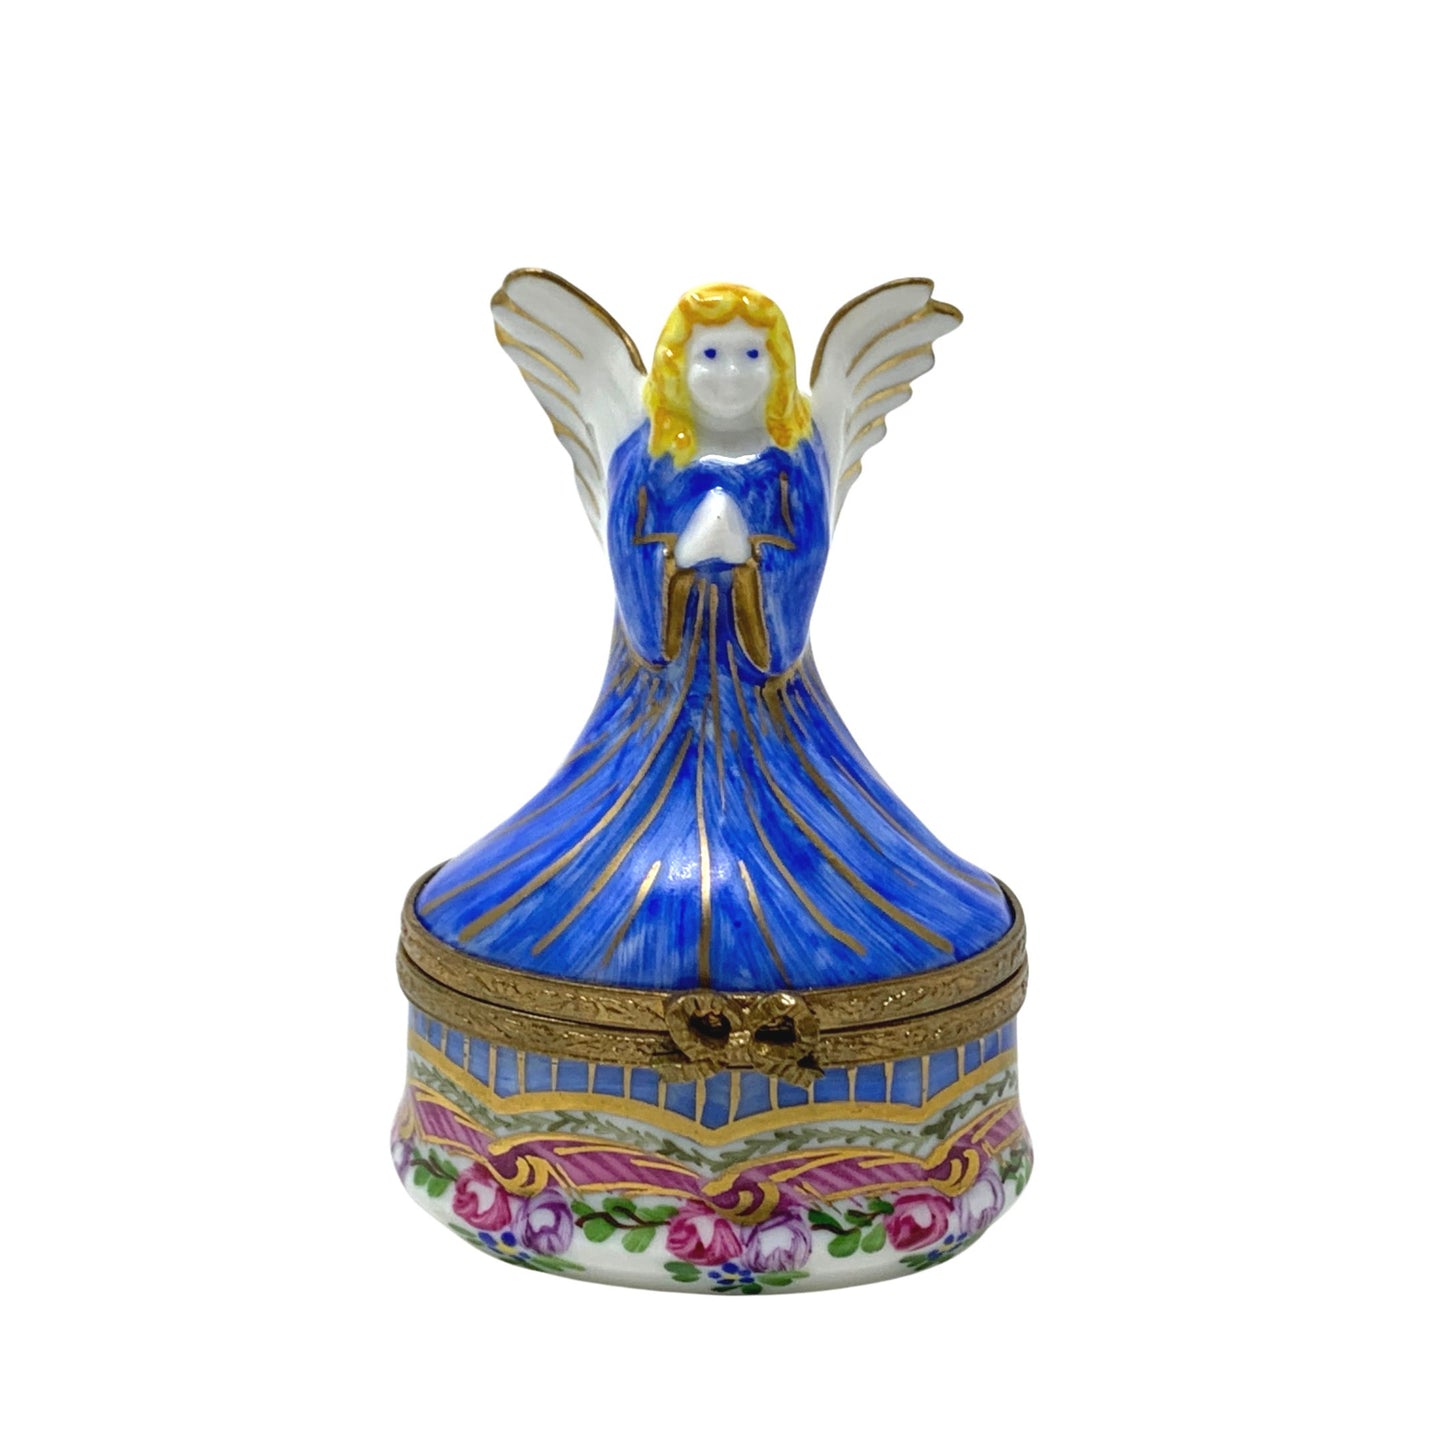 Limoges France Hand Painted by F.B. "Winged Angel" Trinket Box